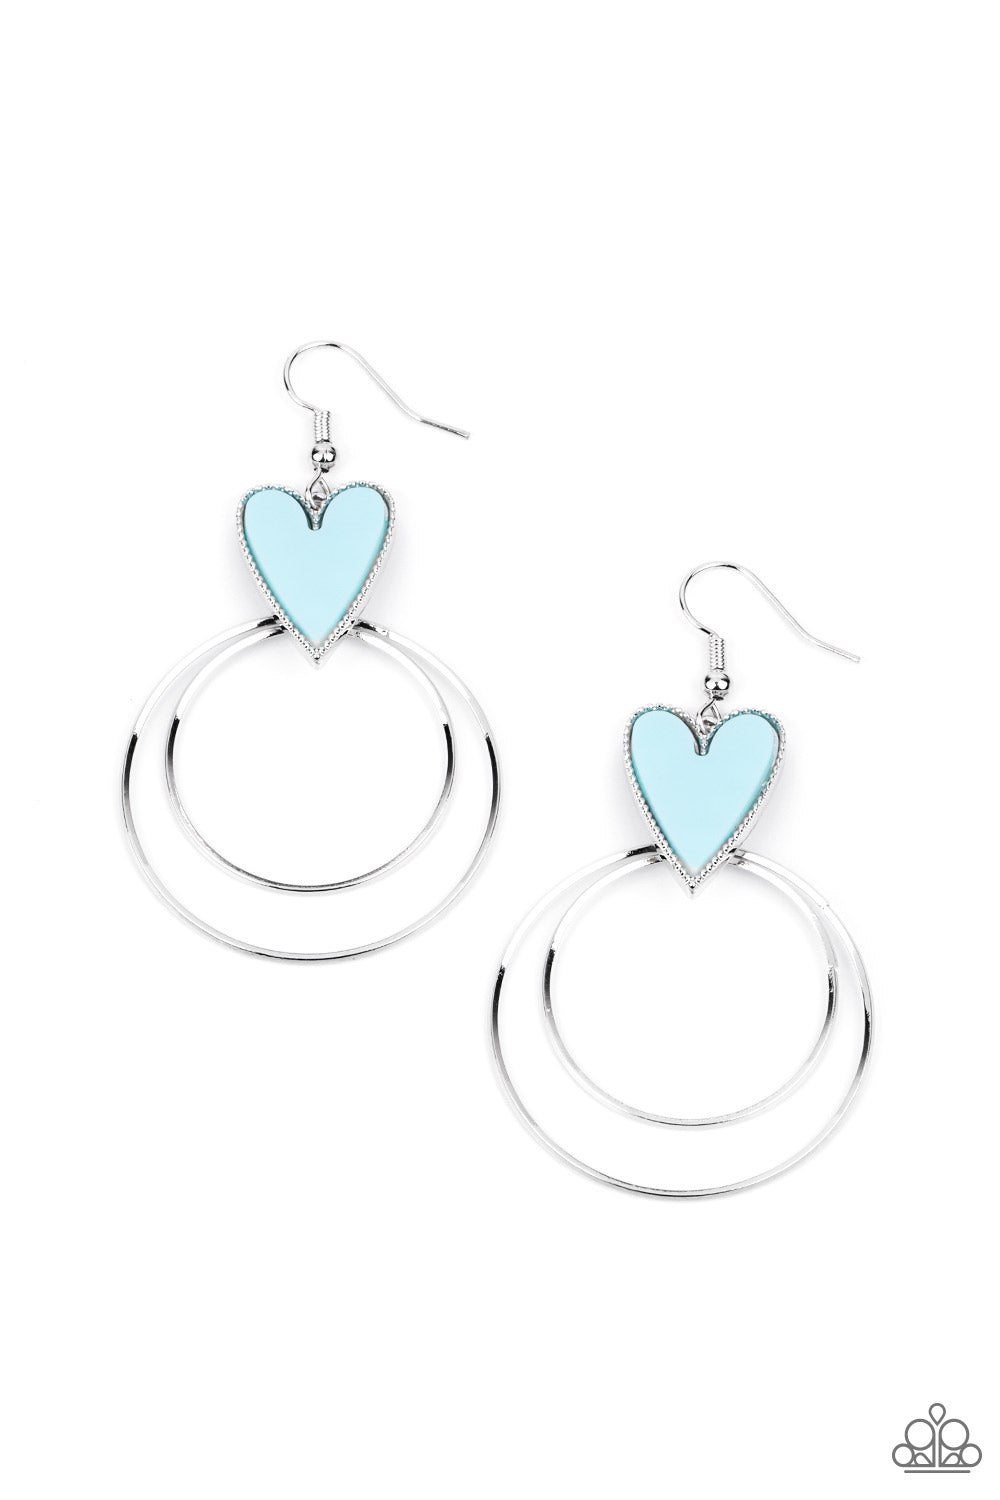 HAPPILY EVER HEARTS - BLUE - Dainty silver hoops attach to the bottom of a playful Cerulean heart frame, creating a flirtatious pop of color. Earring attaches to a standard fishhook fitting.